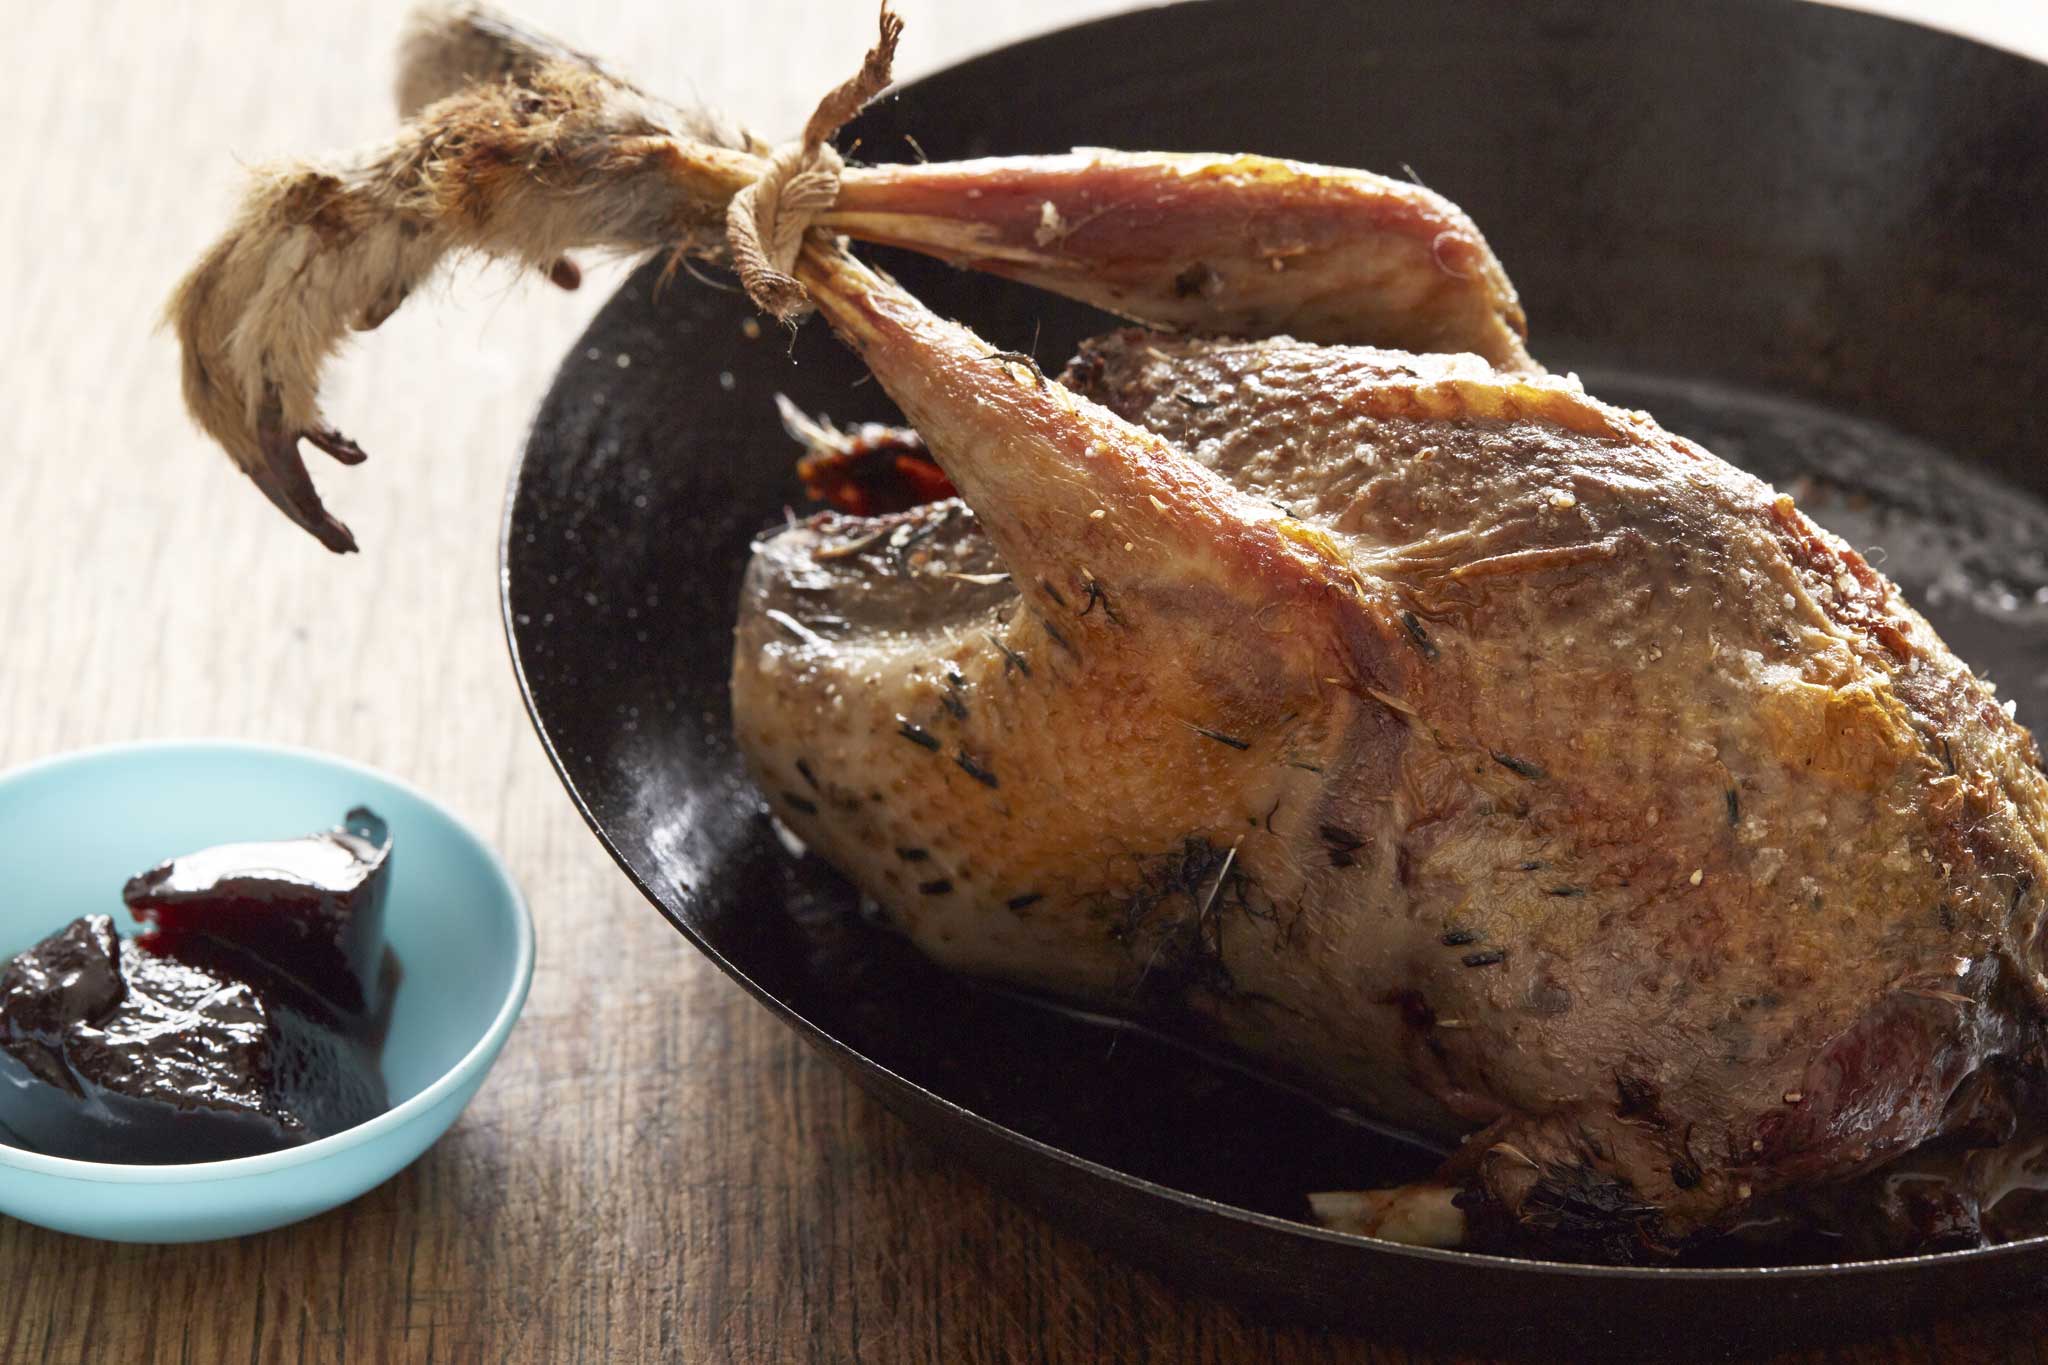 Serve the grouse on or off the bone, with jelly and the gravy separately